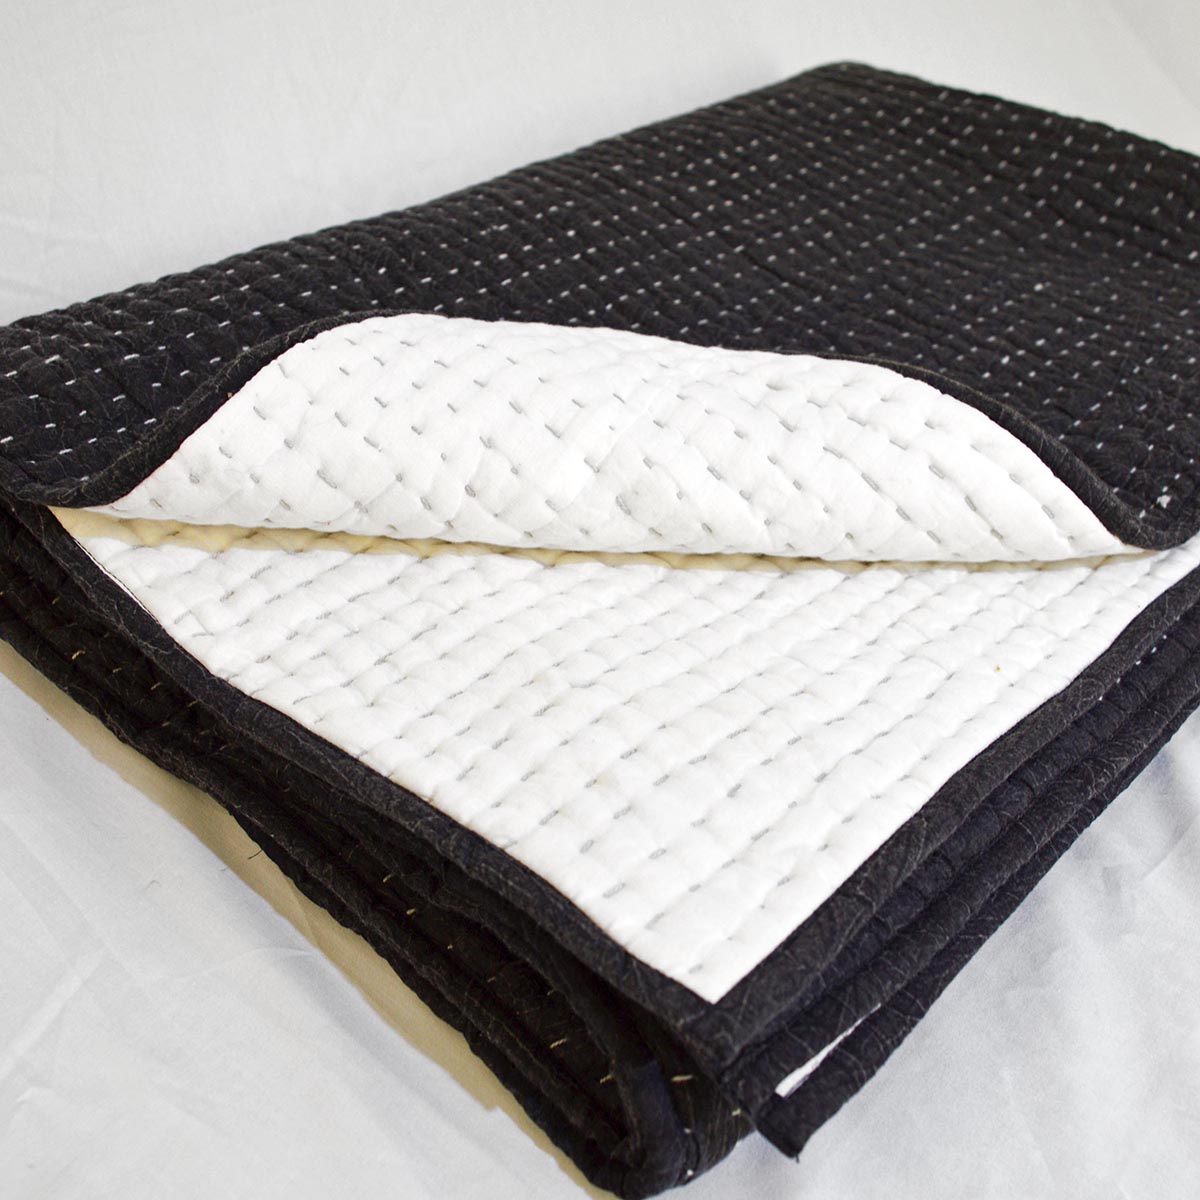 Charcoal quilted Throw blanket, hand quilted and stonewashed, stripe quilting, 100% cotton, 50X60 inches